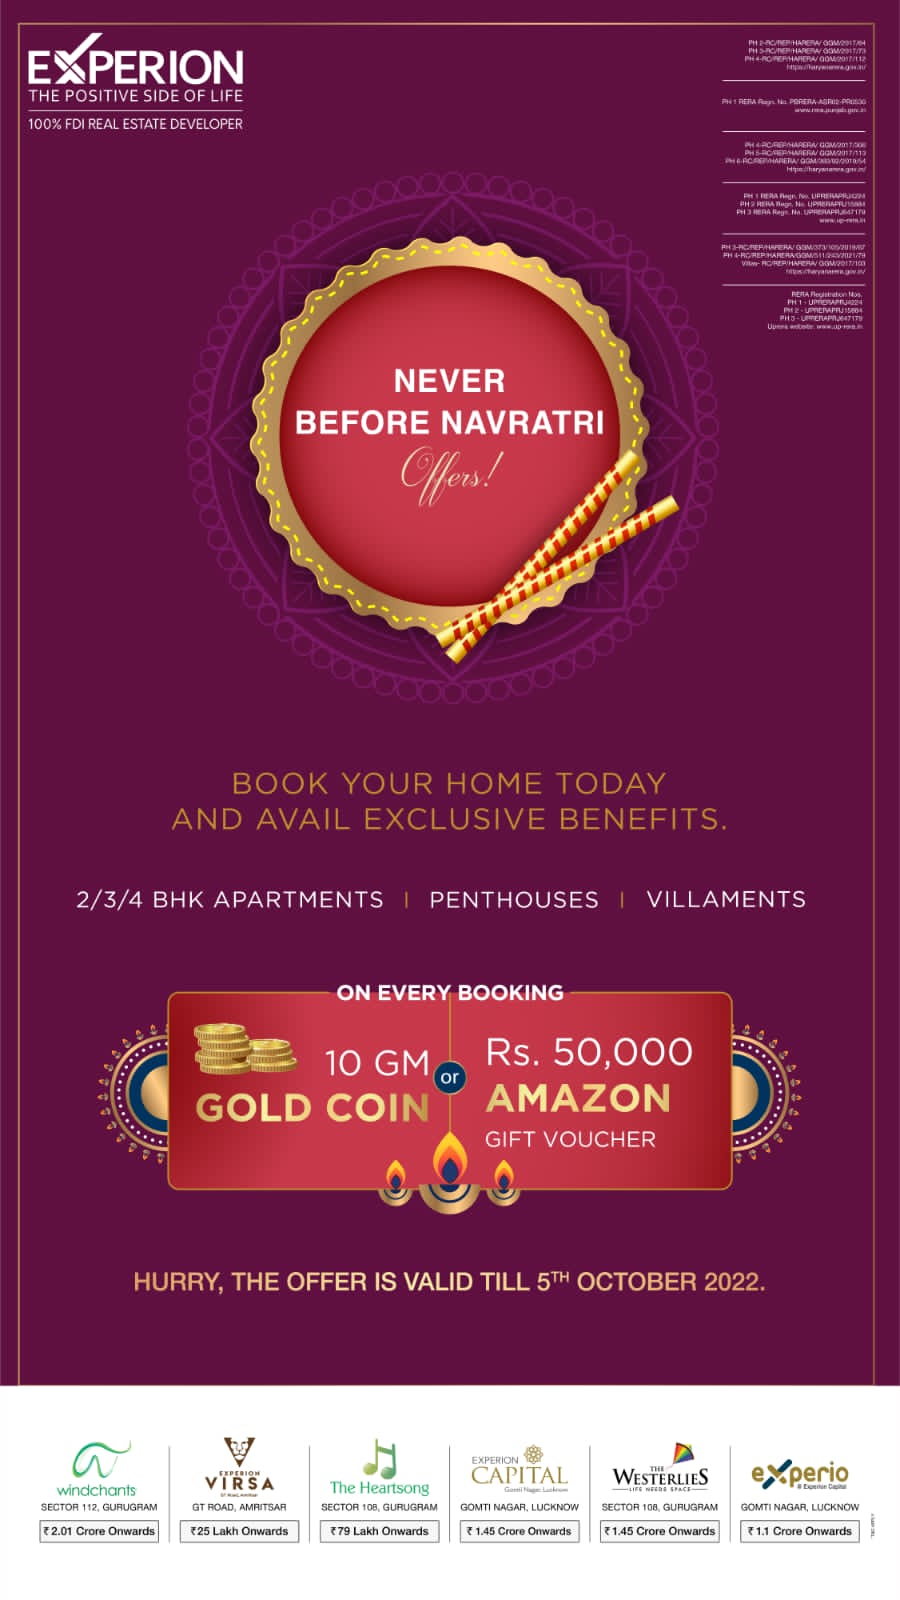 Book your home today and avail exclusive benefit at Experion Developers